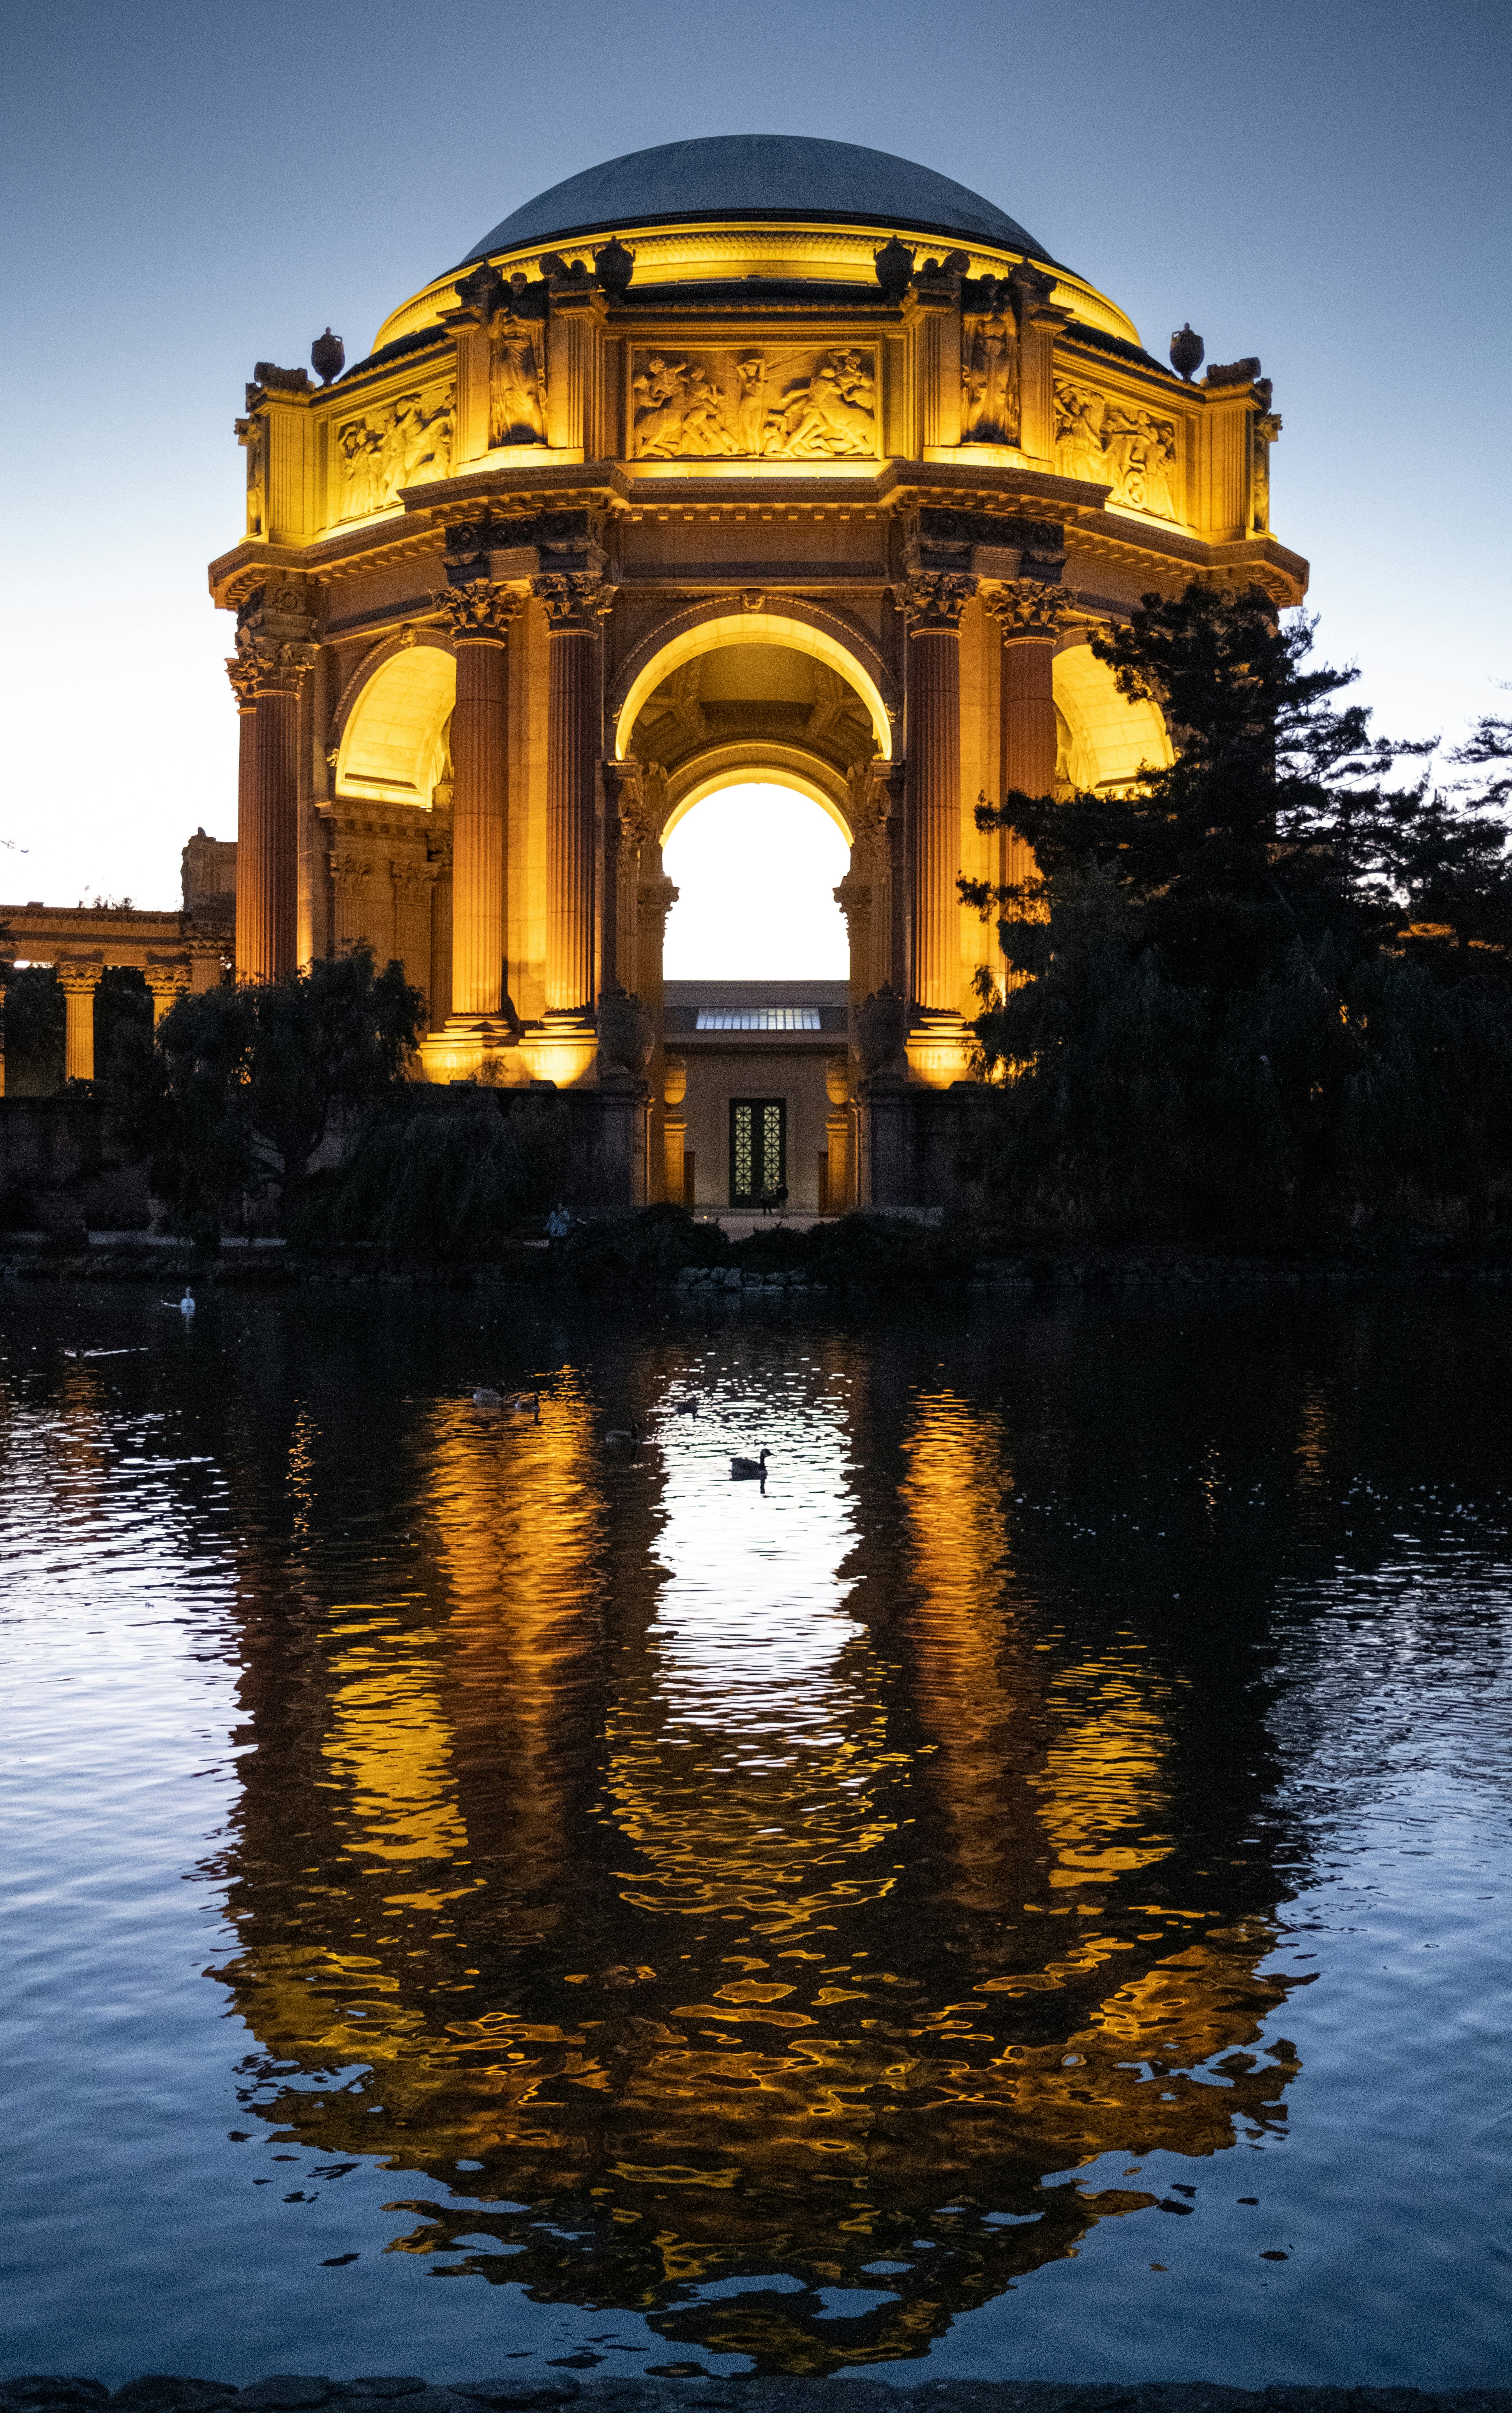 The Palace of Fine Arts in the Marina District of San Francisco - built in 1915 as an art exhibition space for the Panama-Pacific Exposition. It's very photogenic, especially at sunset. 